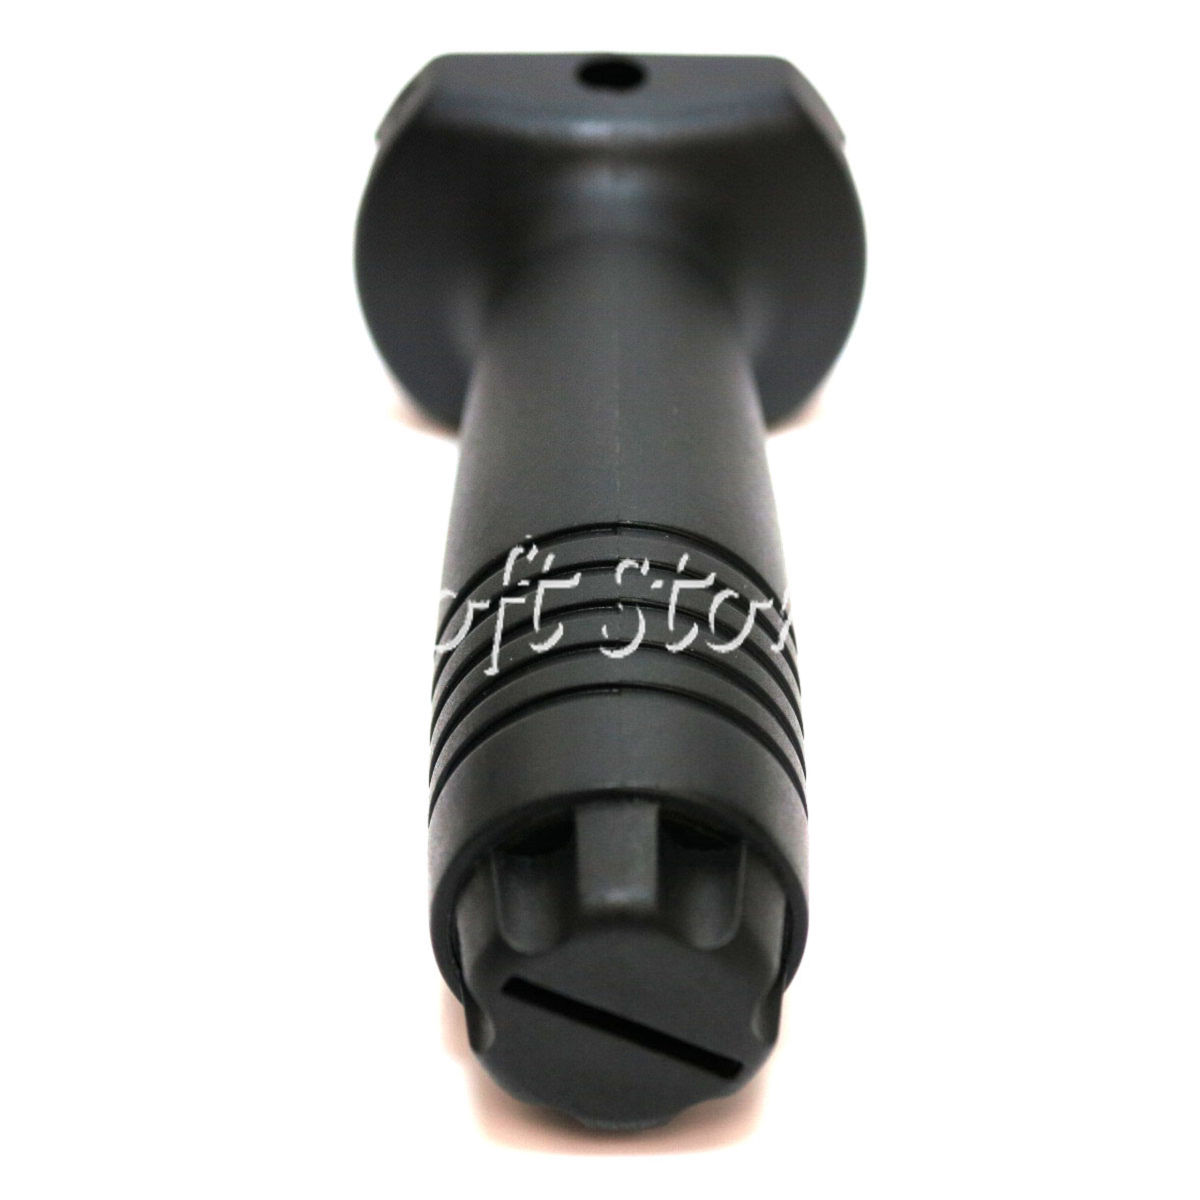 Airsoft Tactical Gear D-Boys Knights KAC Style QD Vertical Foregrip Grip Black - Click Image to Close